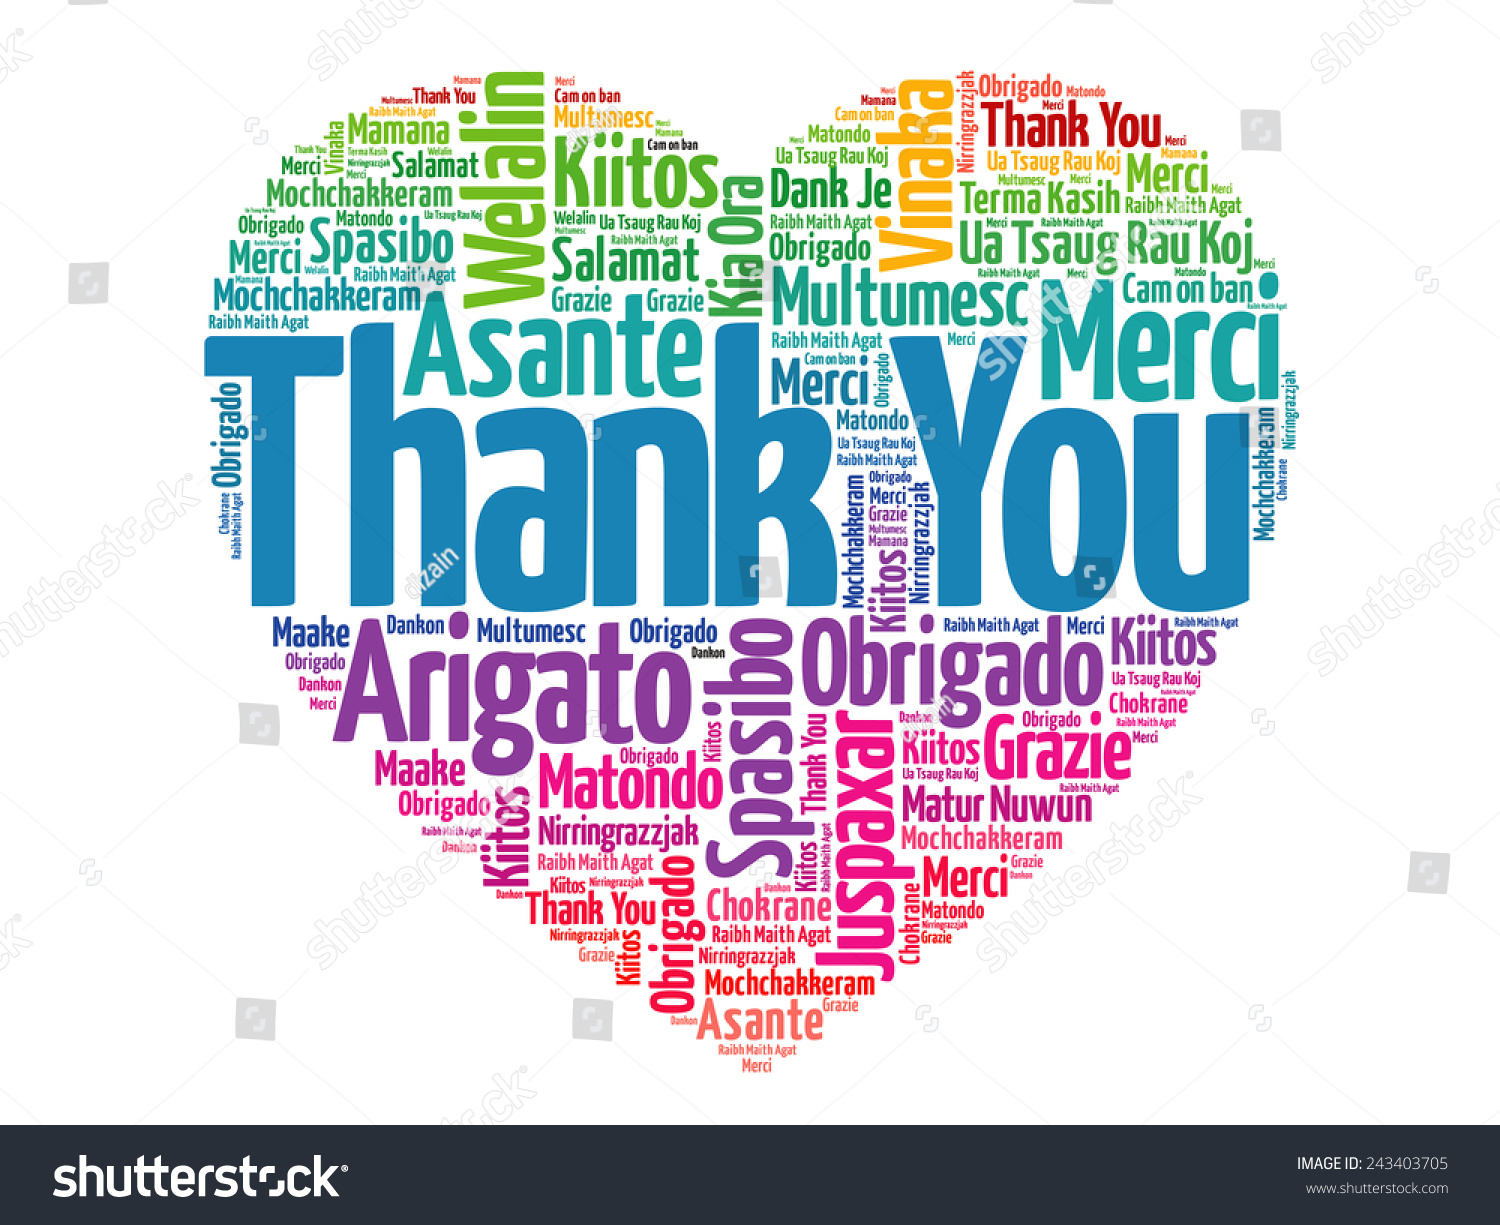 thank you clipart in different languages - photo #28